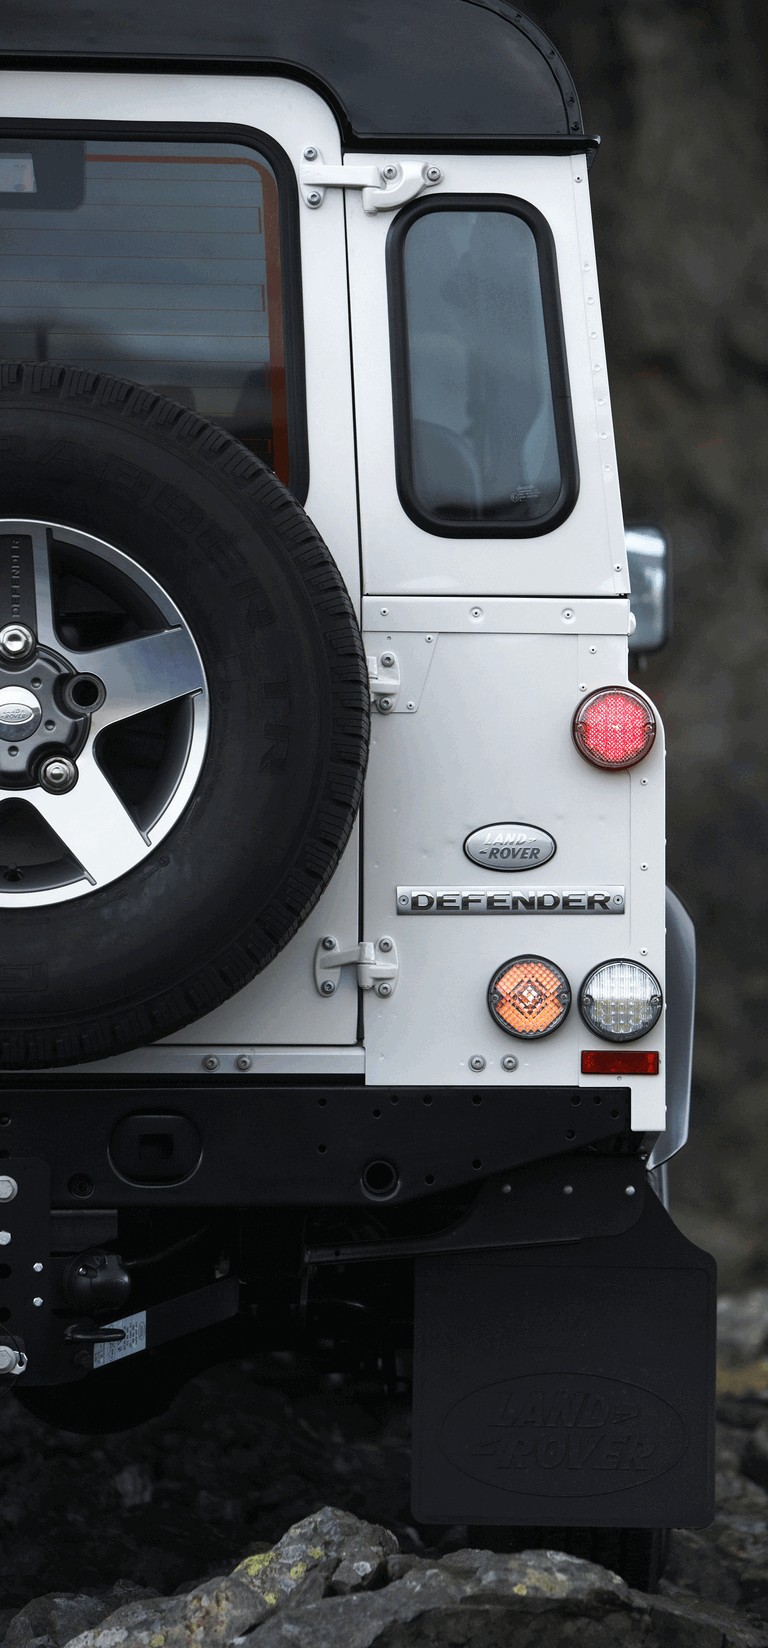 2009 Land Rover Defender Limited Edition Ice 259701